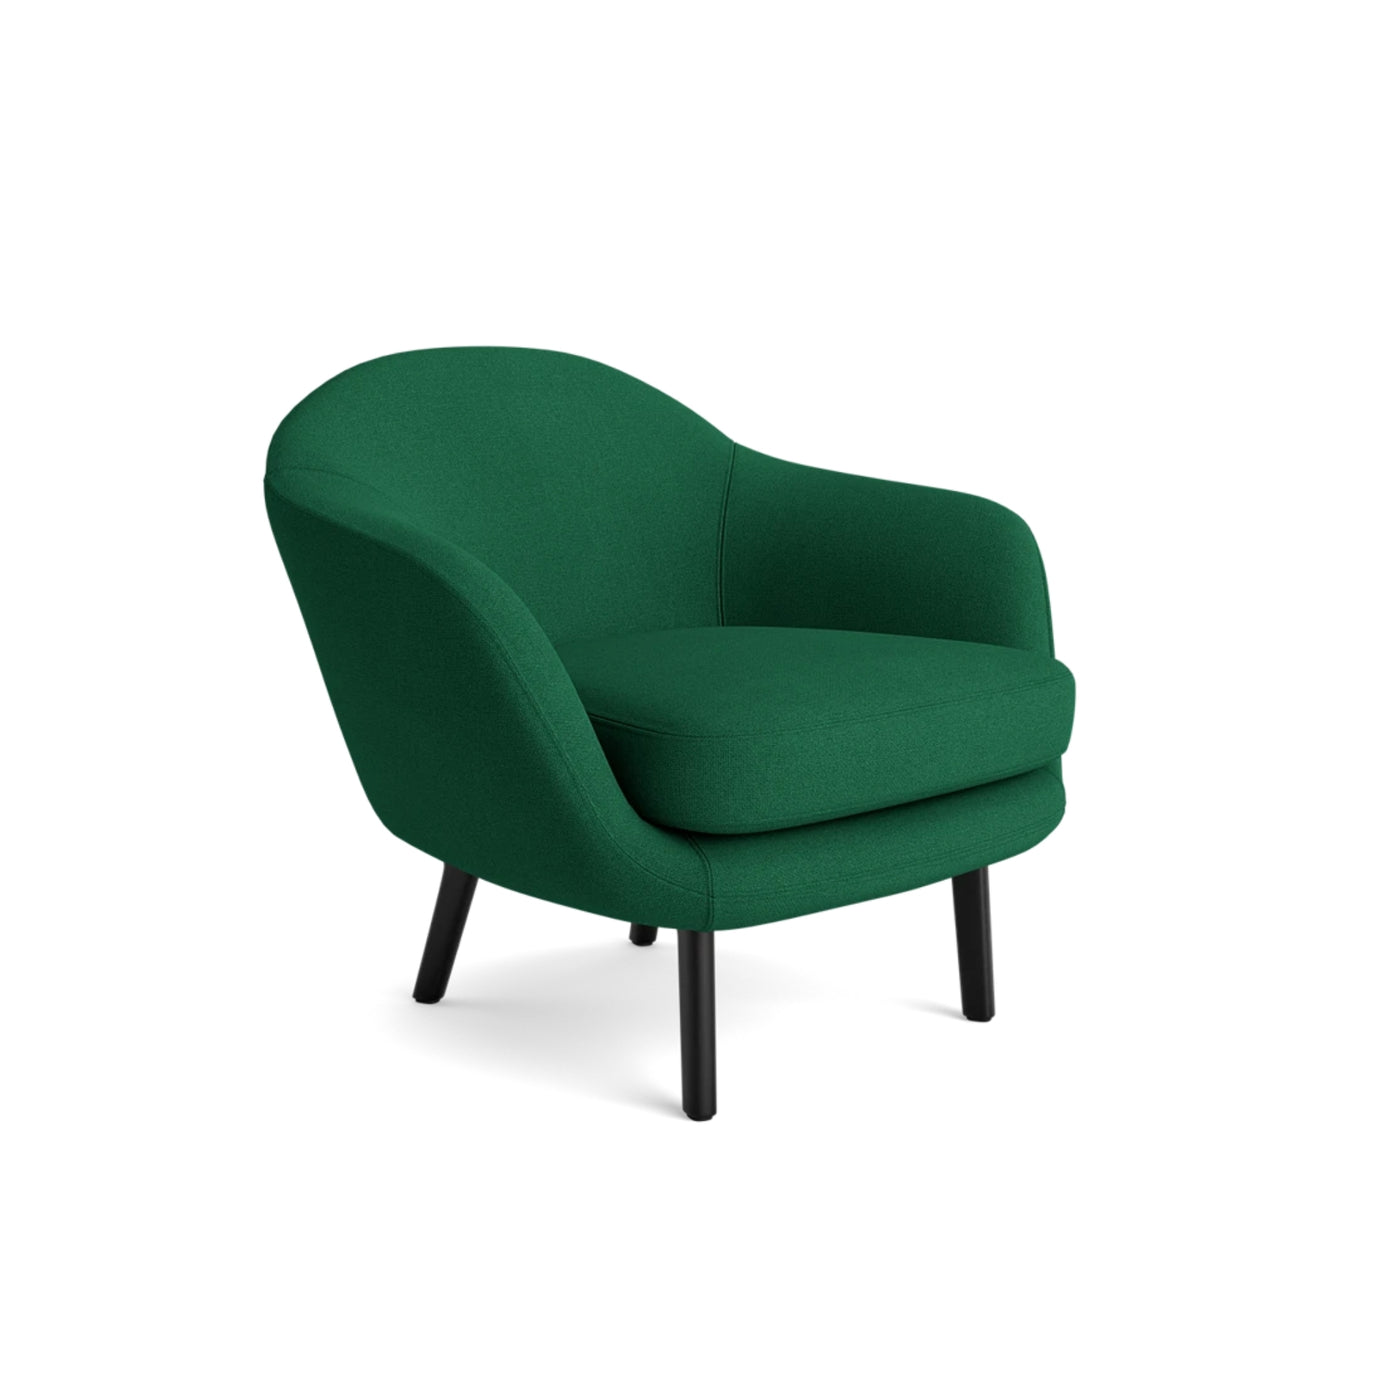 Normann Copenhagen Sum Armchair. Made to order at someday designs. #colour_hallingdal-944